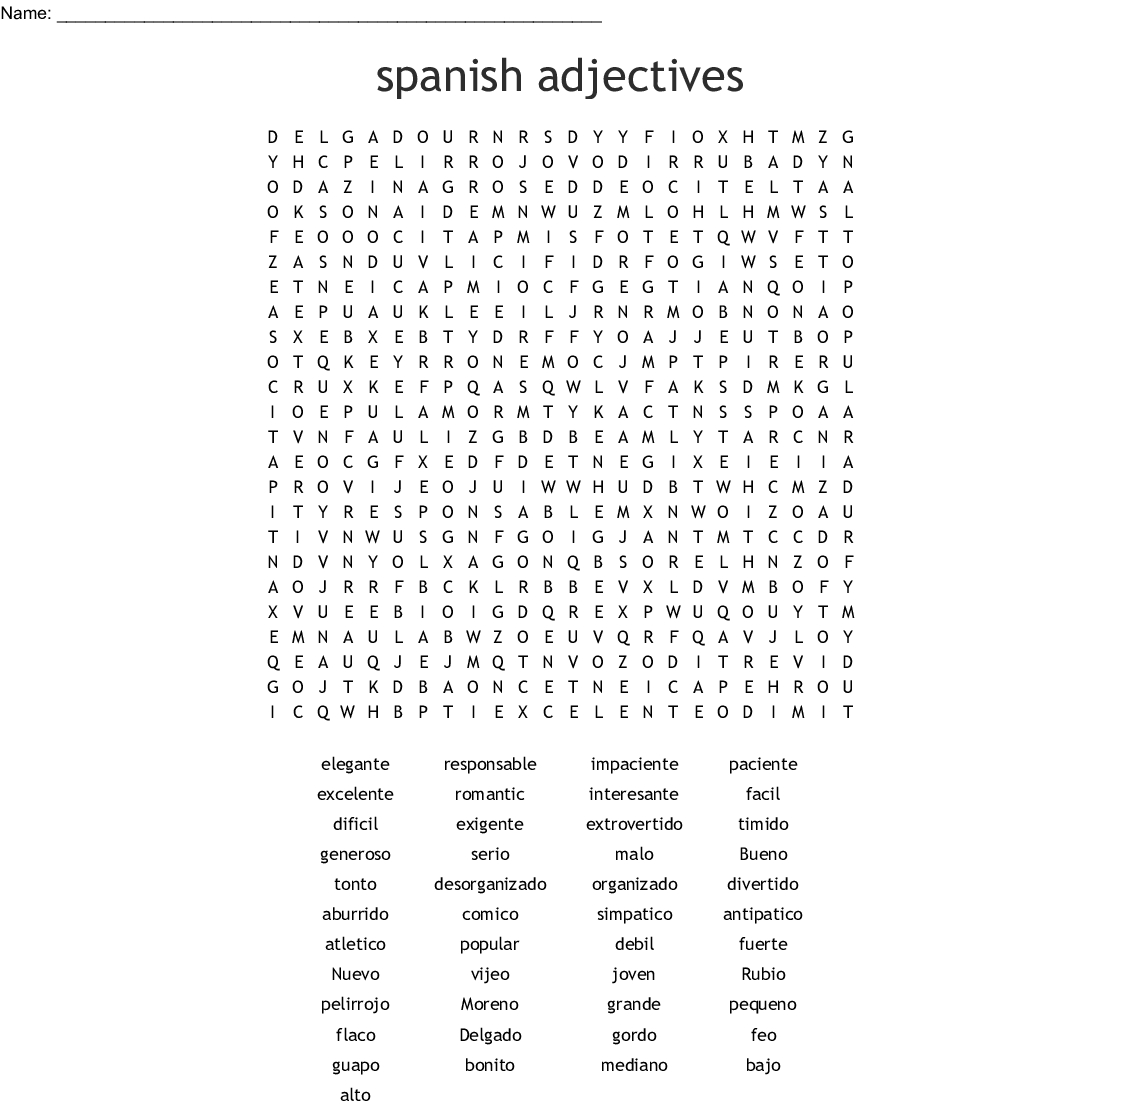 Spanish Adjectives Word Search - Wordmint